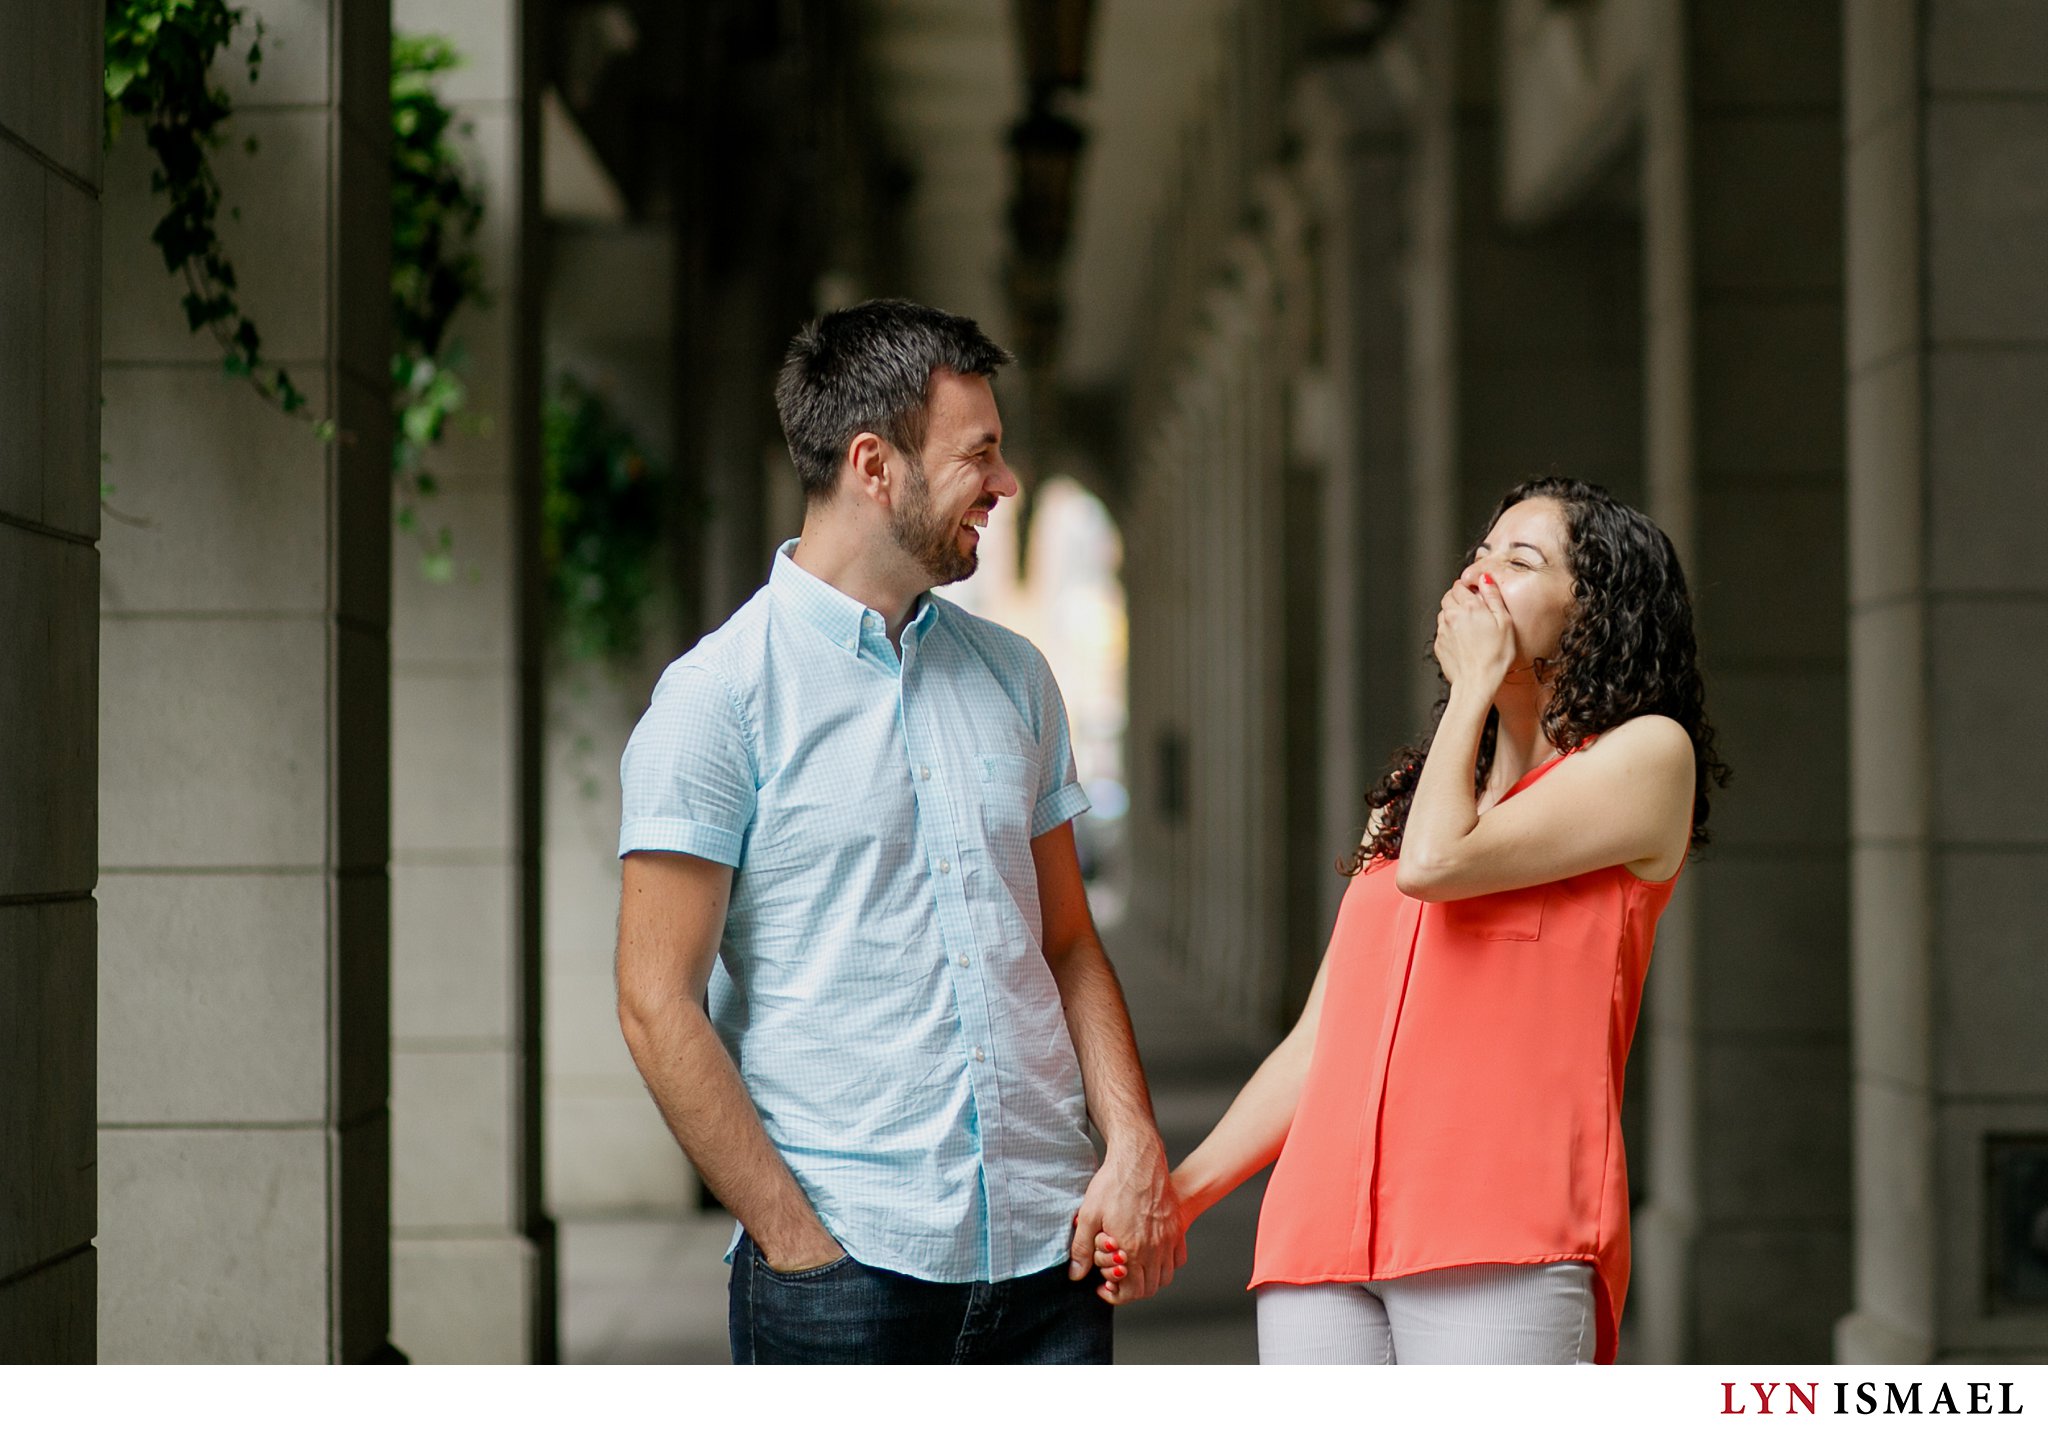 Toronto wedding photographer photographs an Engagement session at Toronto's St Lawrence Area